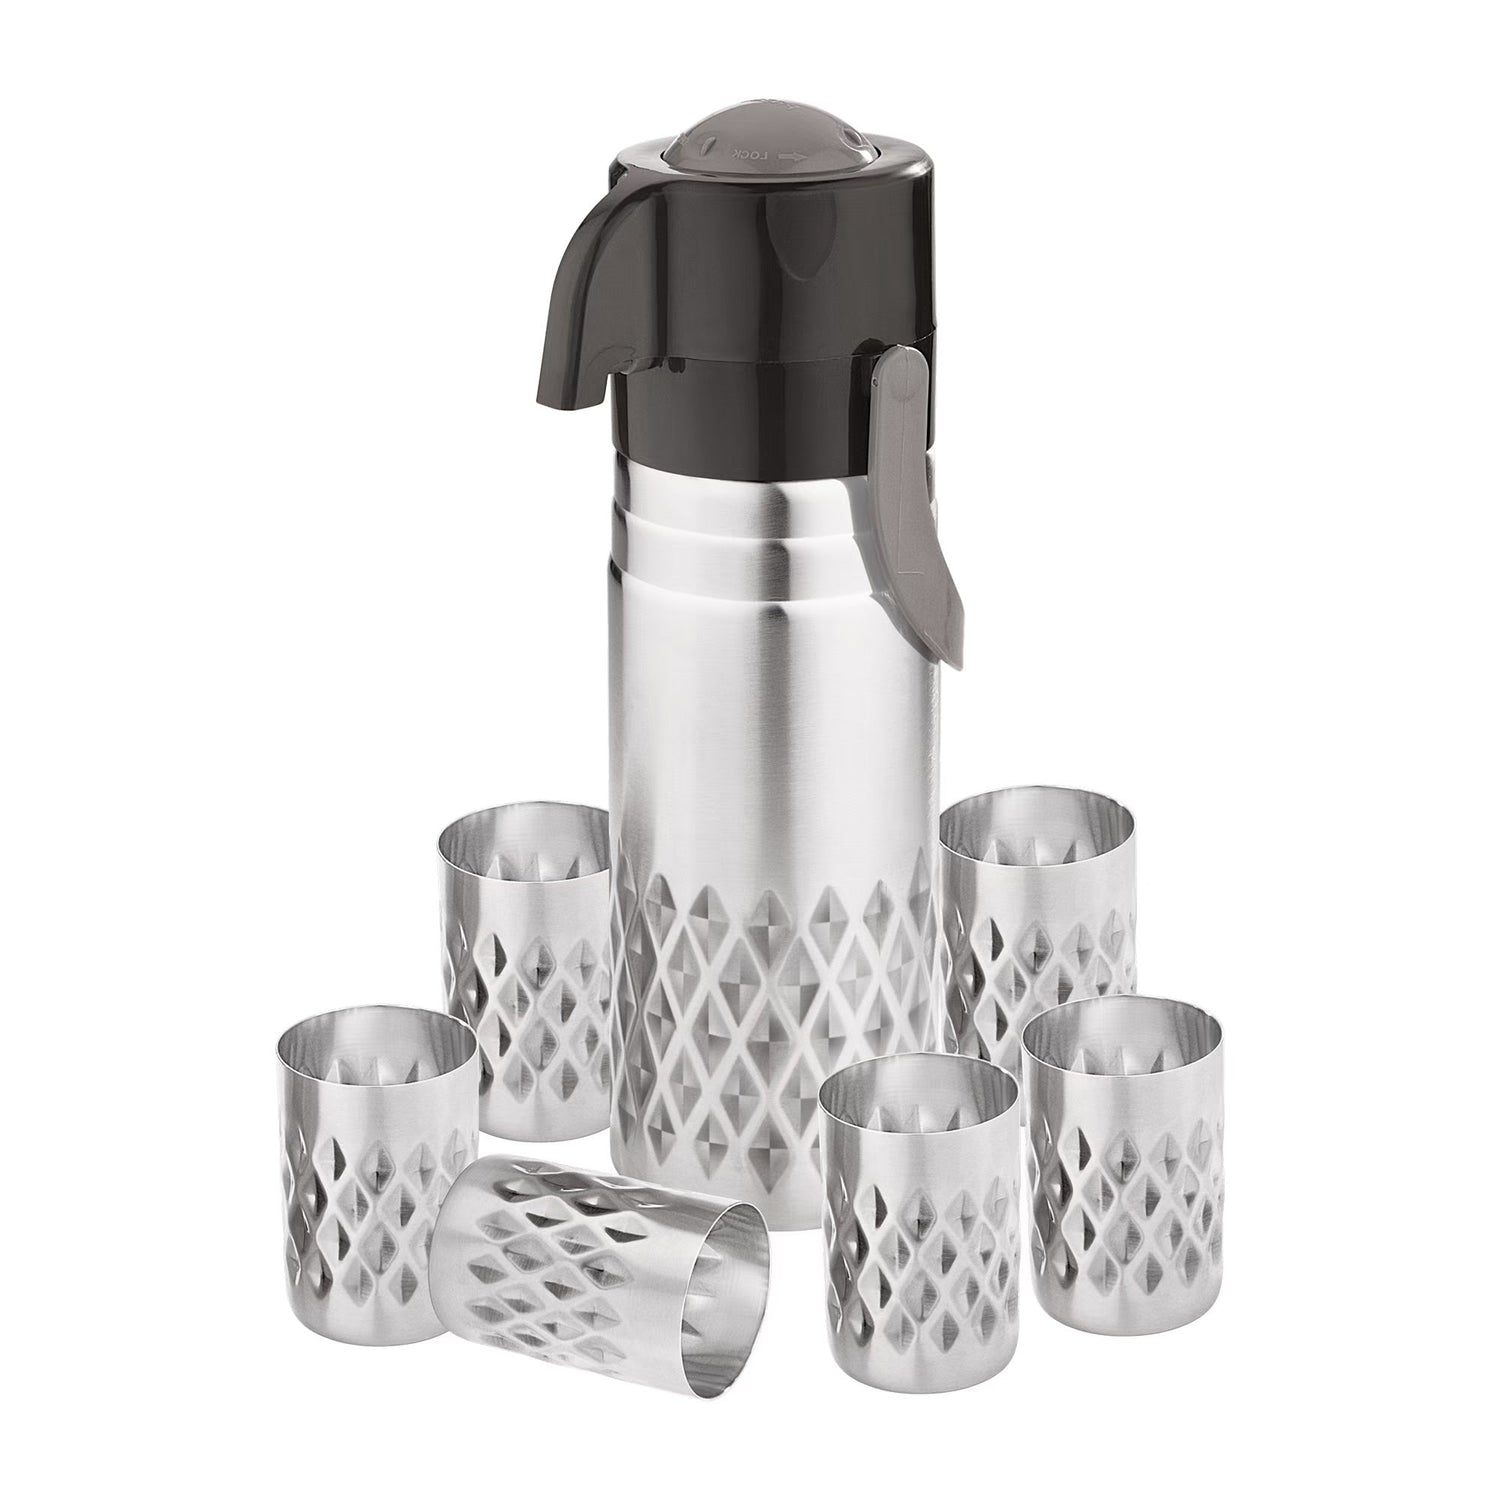 Pipal Jharna Stainless Steel 7pcs Set (1 Airpot and 6 Glass)